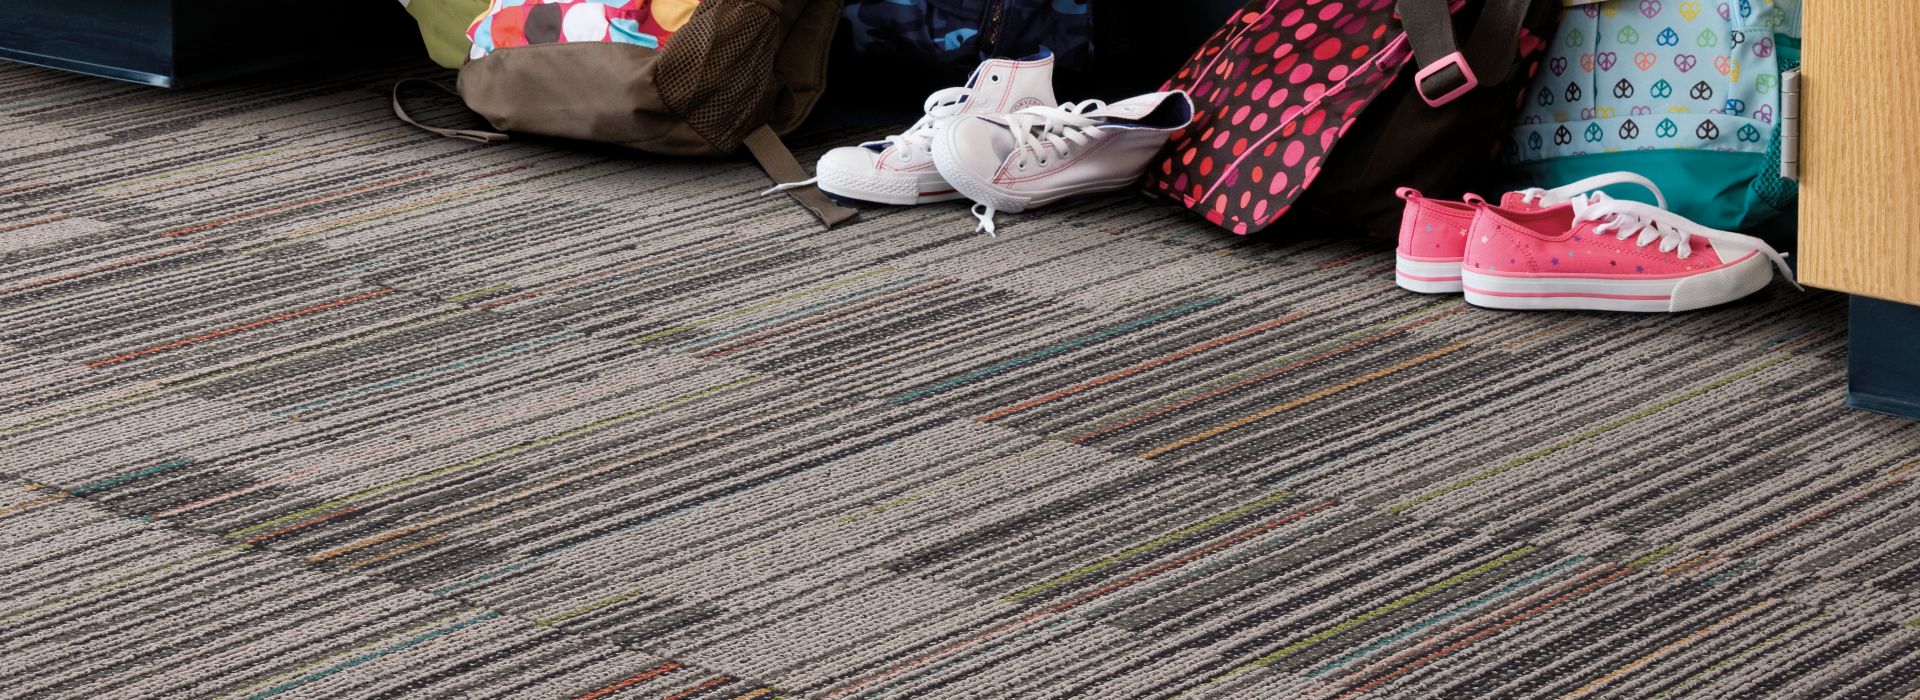 Interface Student Council Carpet Tile in Schmick shown in classroom